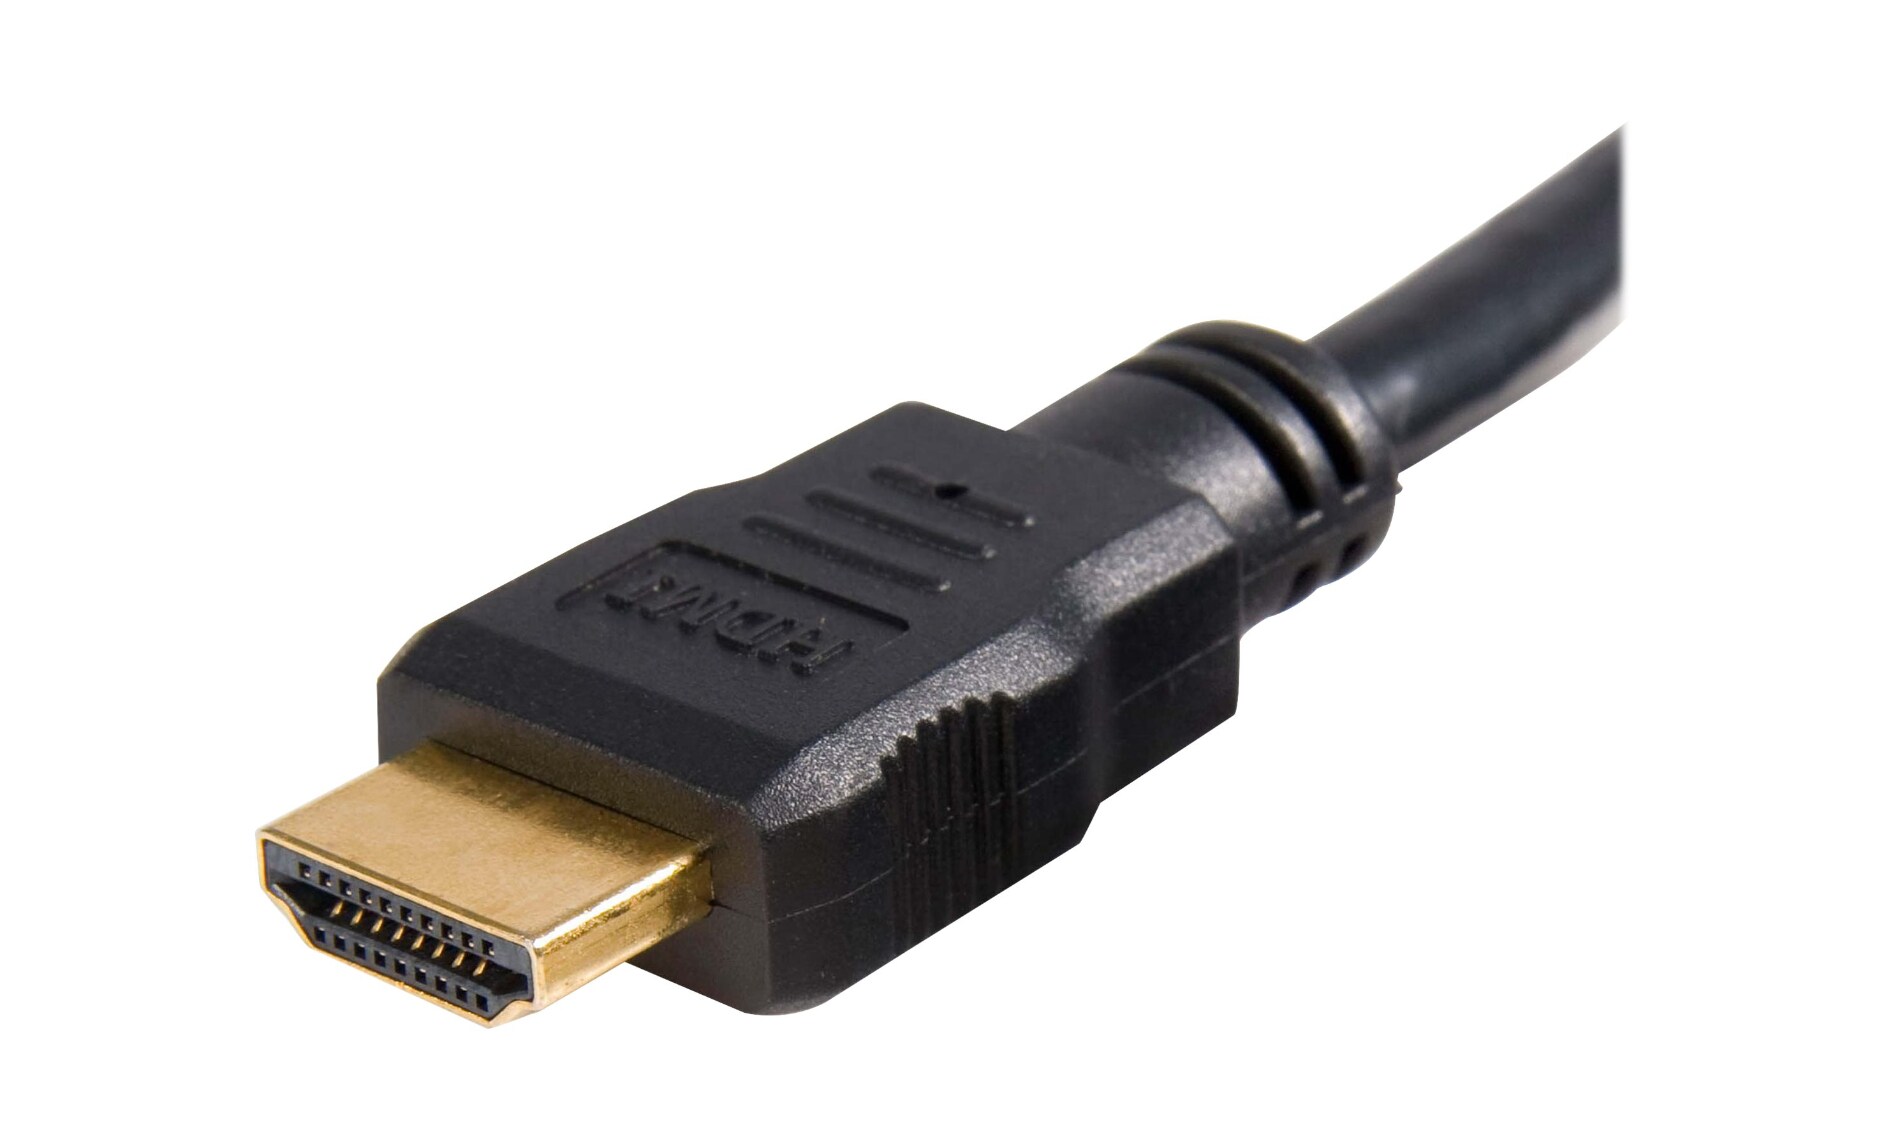 HDMI Cable end top view